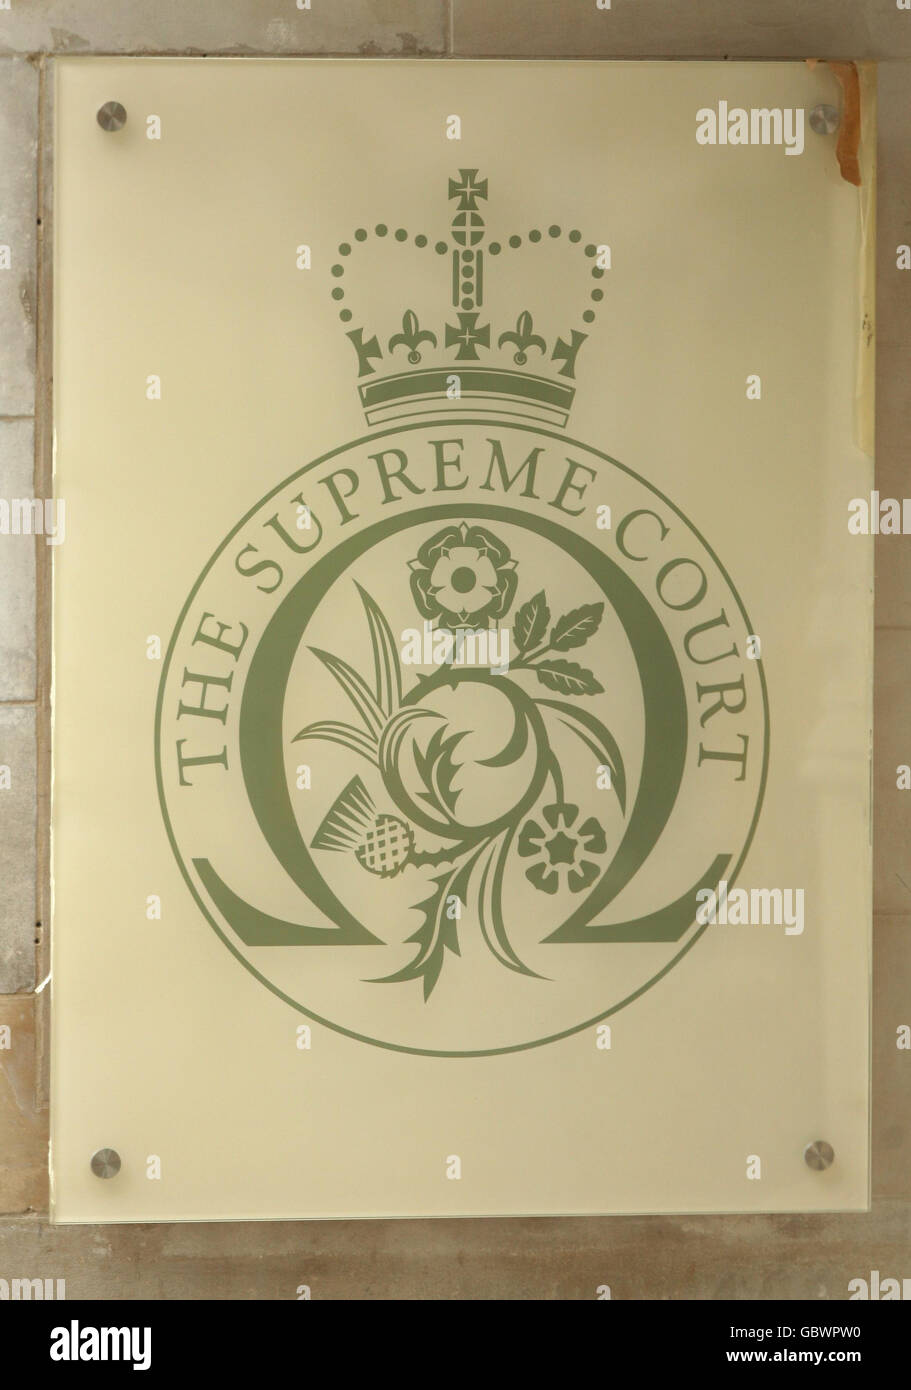 The badge of the Supreme Court of the United Kingdom, whose construction at the renovated Middlesex Guildhall in Parliament Square in central London, has until recently been hidden behind hoardings. Stock Photo